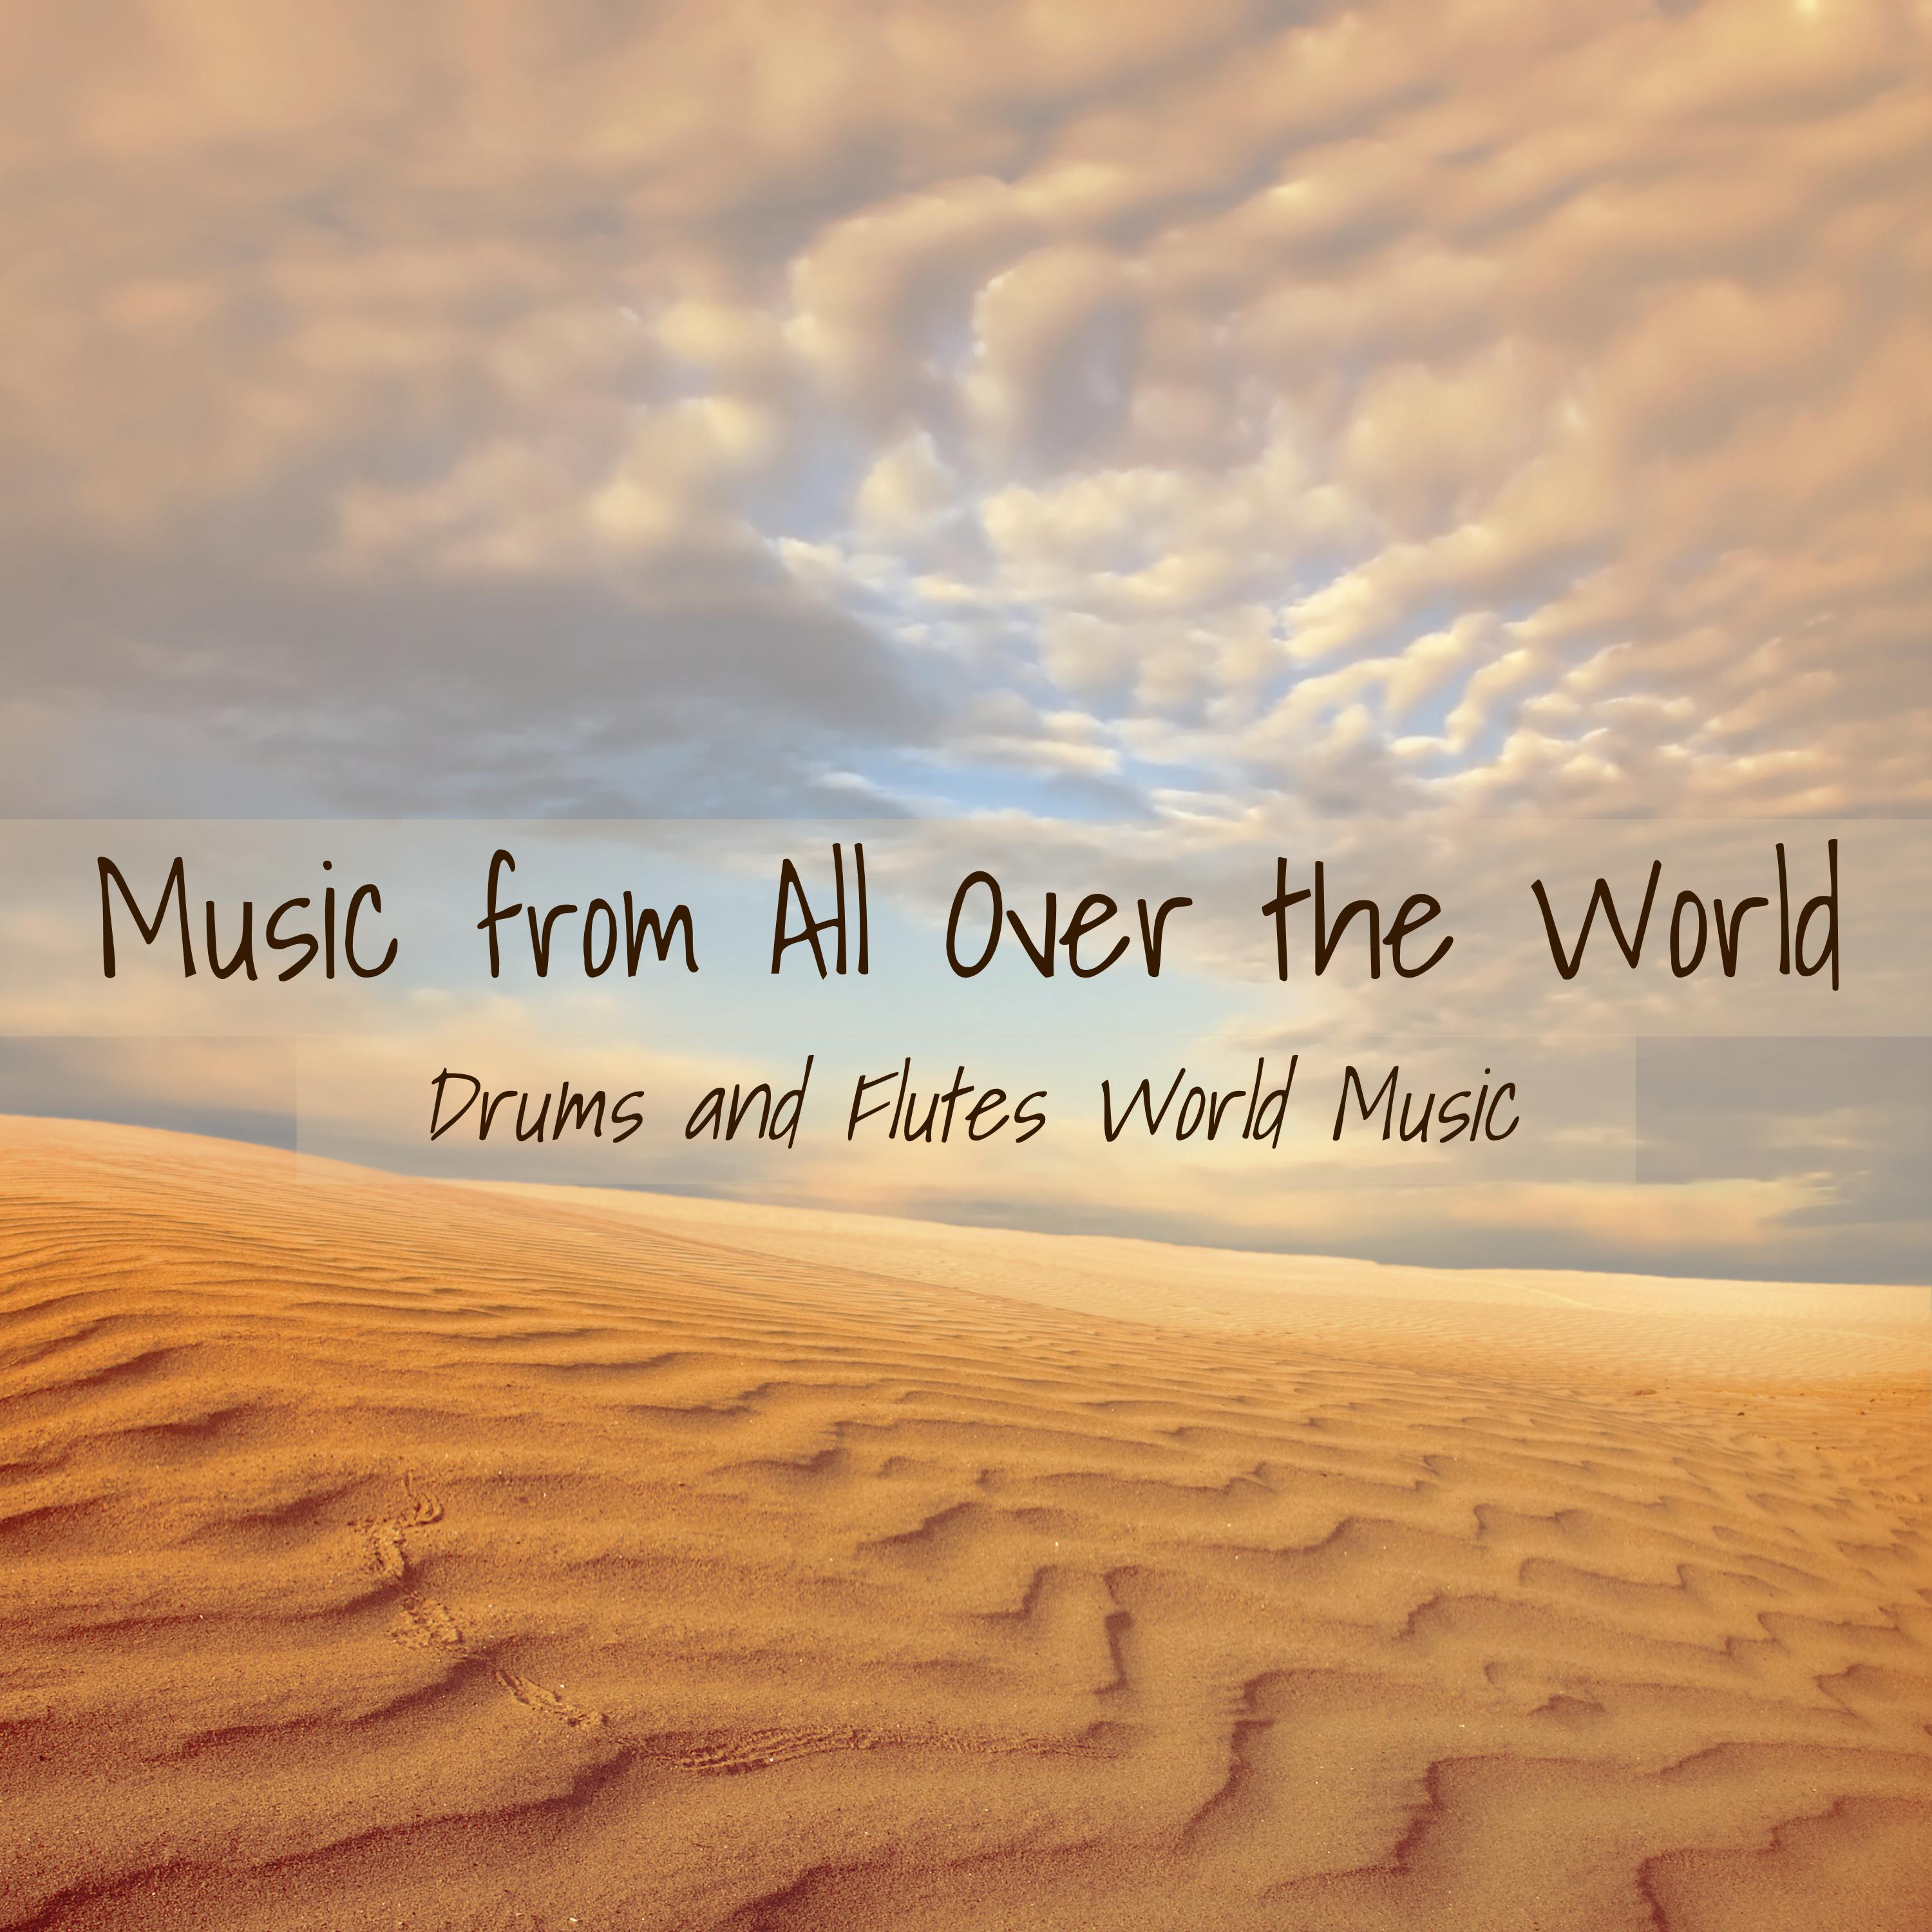 Music from All Over the World  Best Instrumental Music, Drums and Flutes World Music